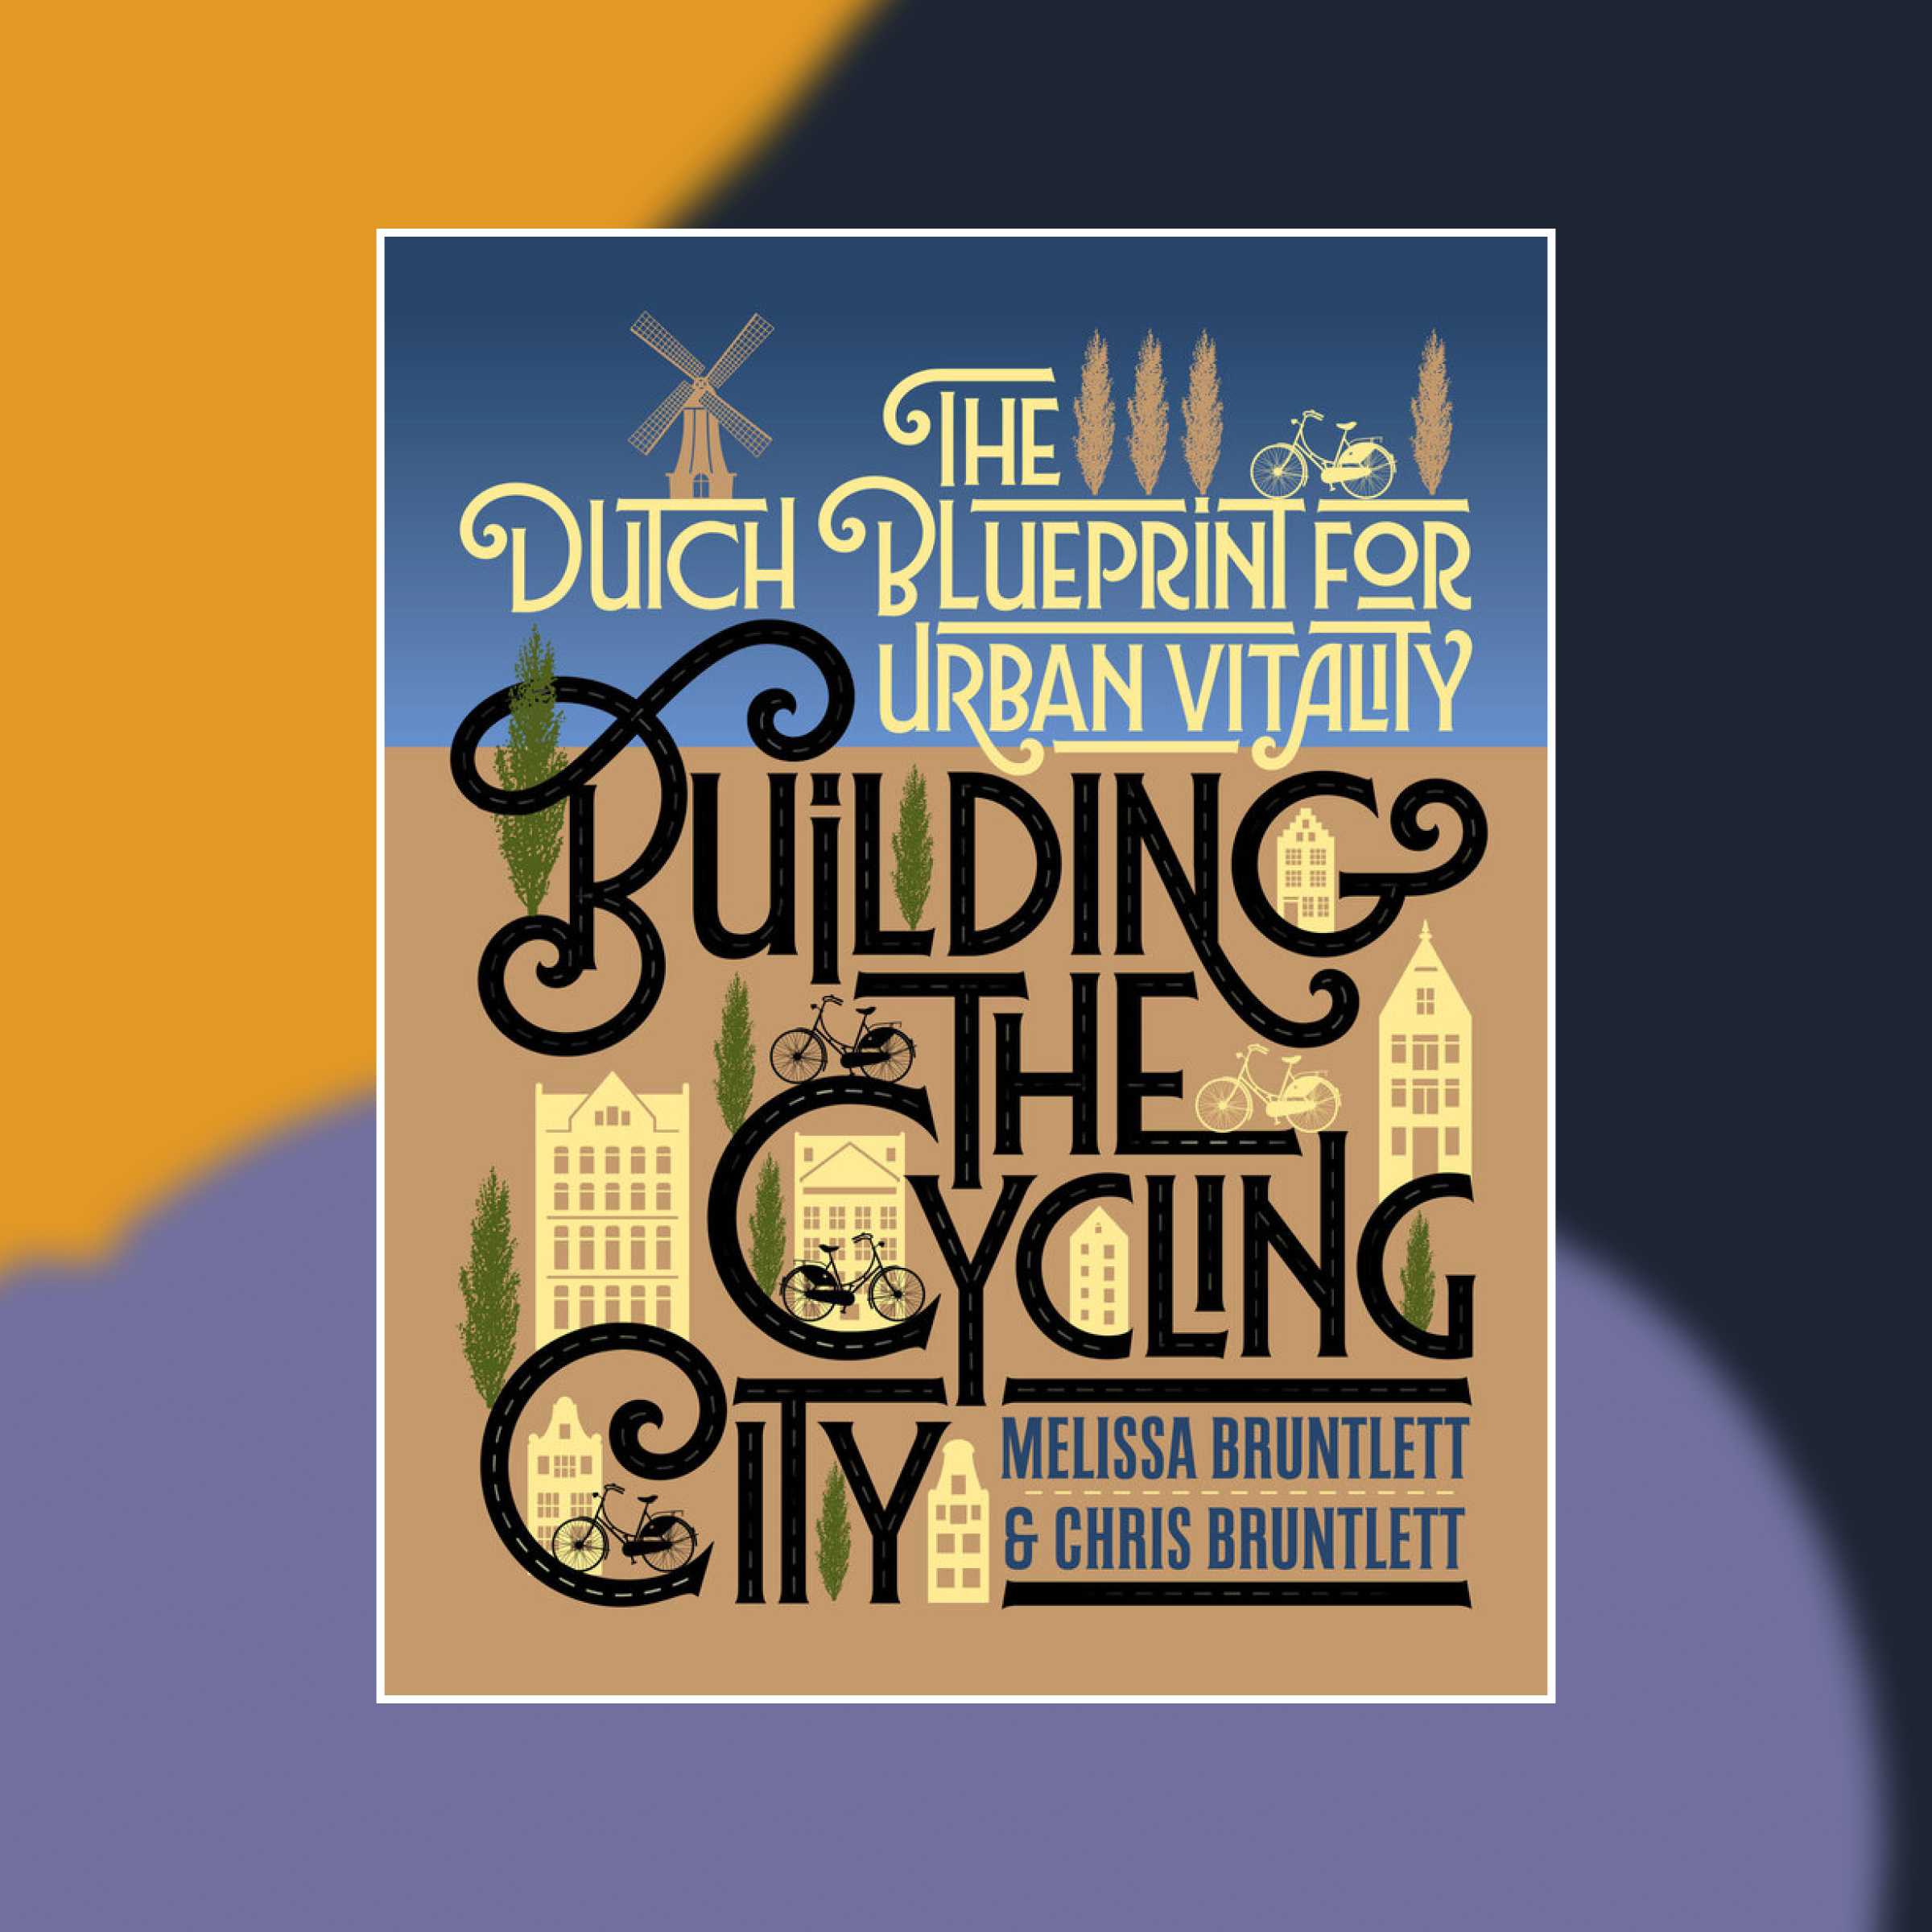 Book cover of Building the Cycling City against an abstract painted background